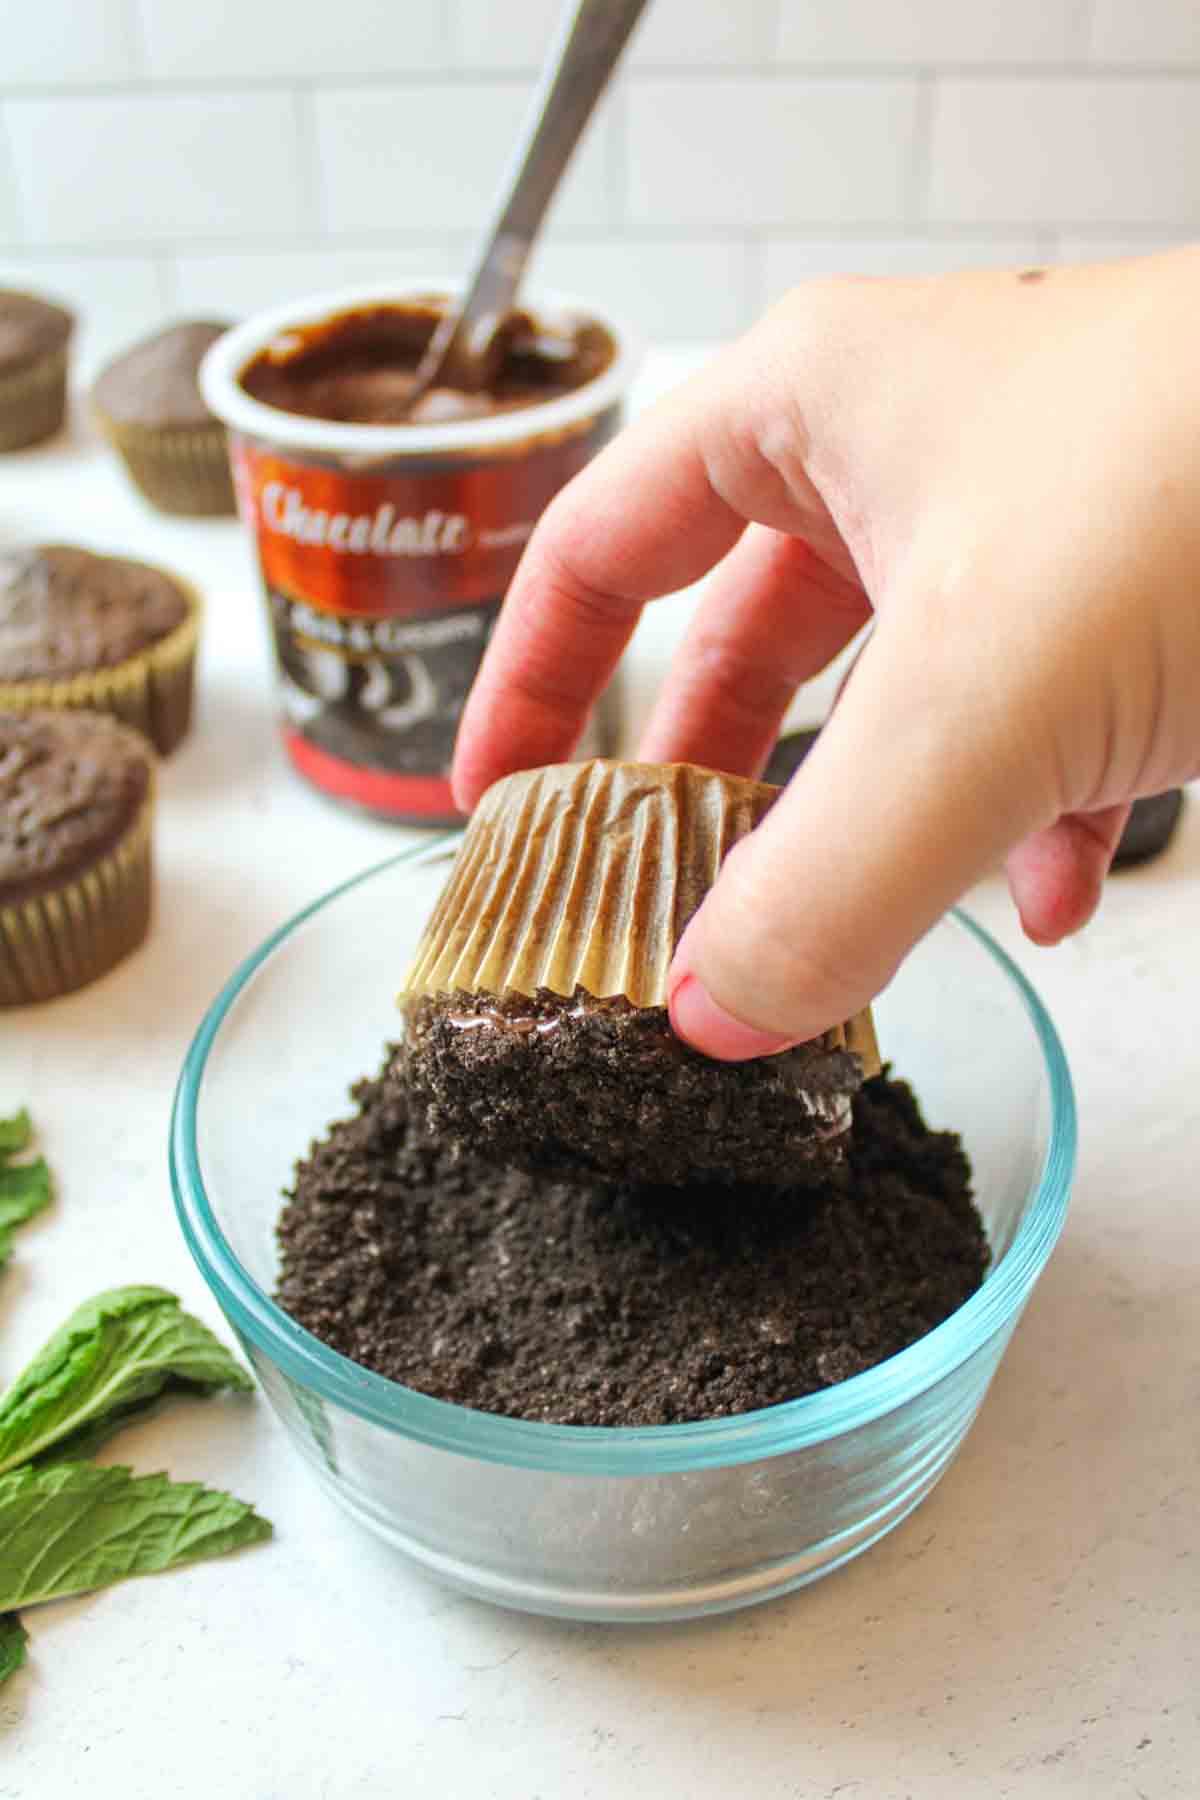 dipping the chocolate cupcakes in oreo crumb mixture